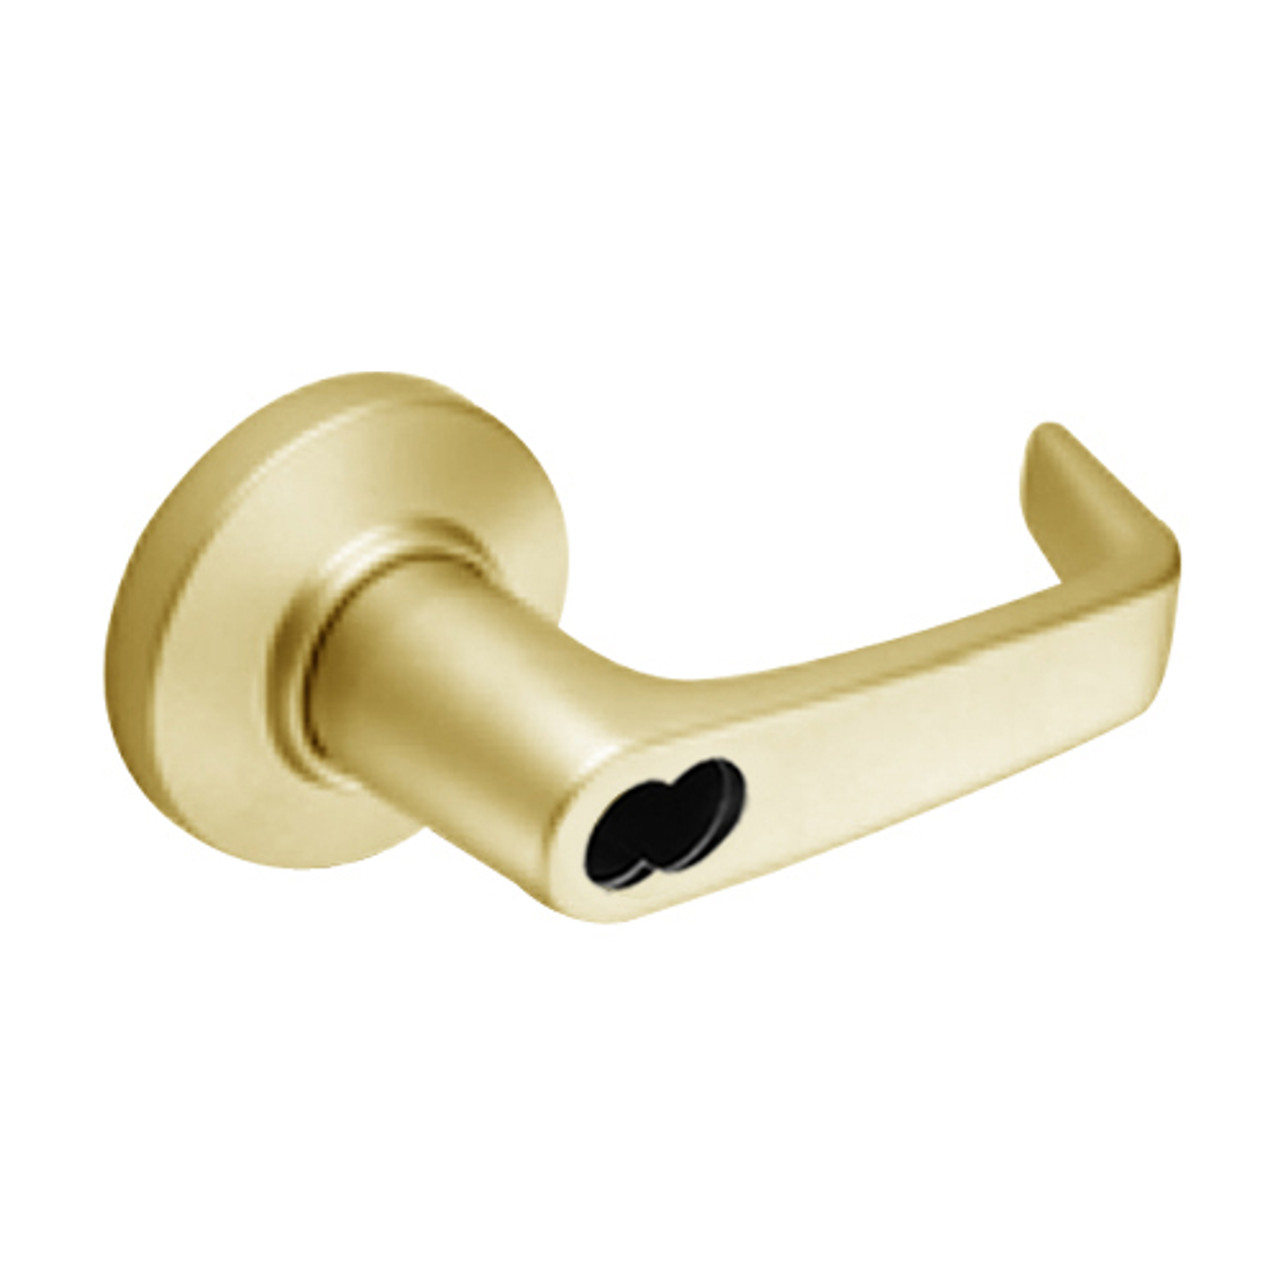 9K37A15CS3605 Best 9K Series Dormitory or Storeroom Cylindrical Lever Locks with Contour Angle with Return Lever Design Accept 7 Pin Best Core in Bright Brass